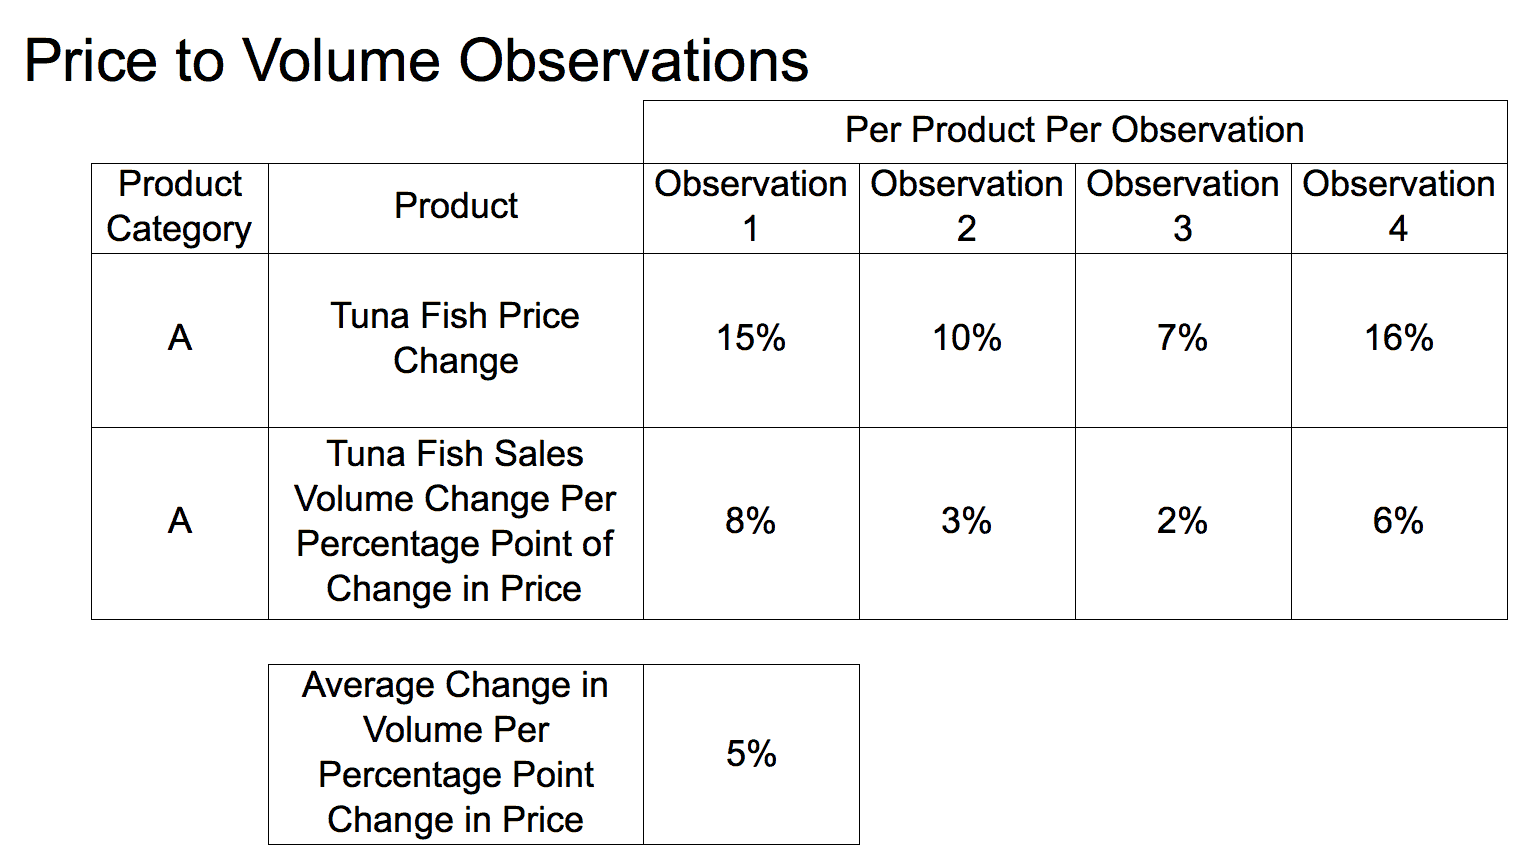 Price to Volume Observations